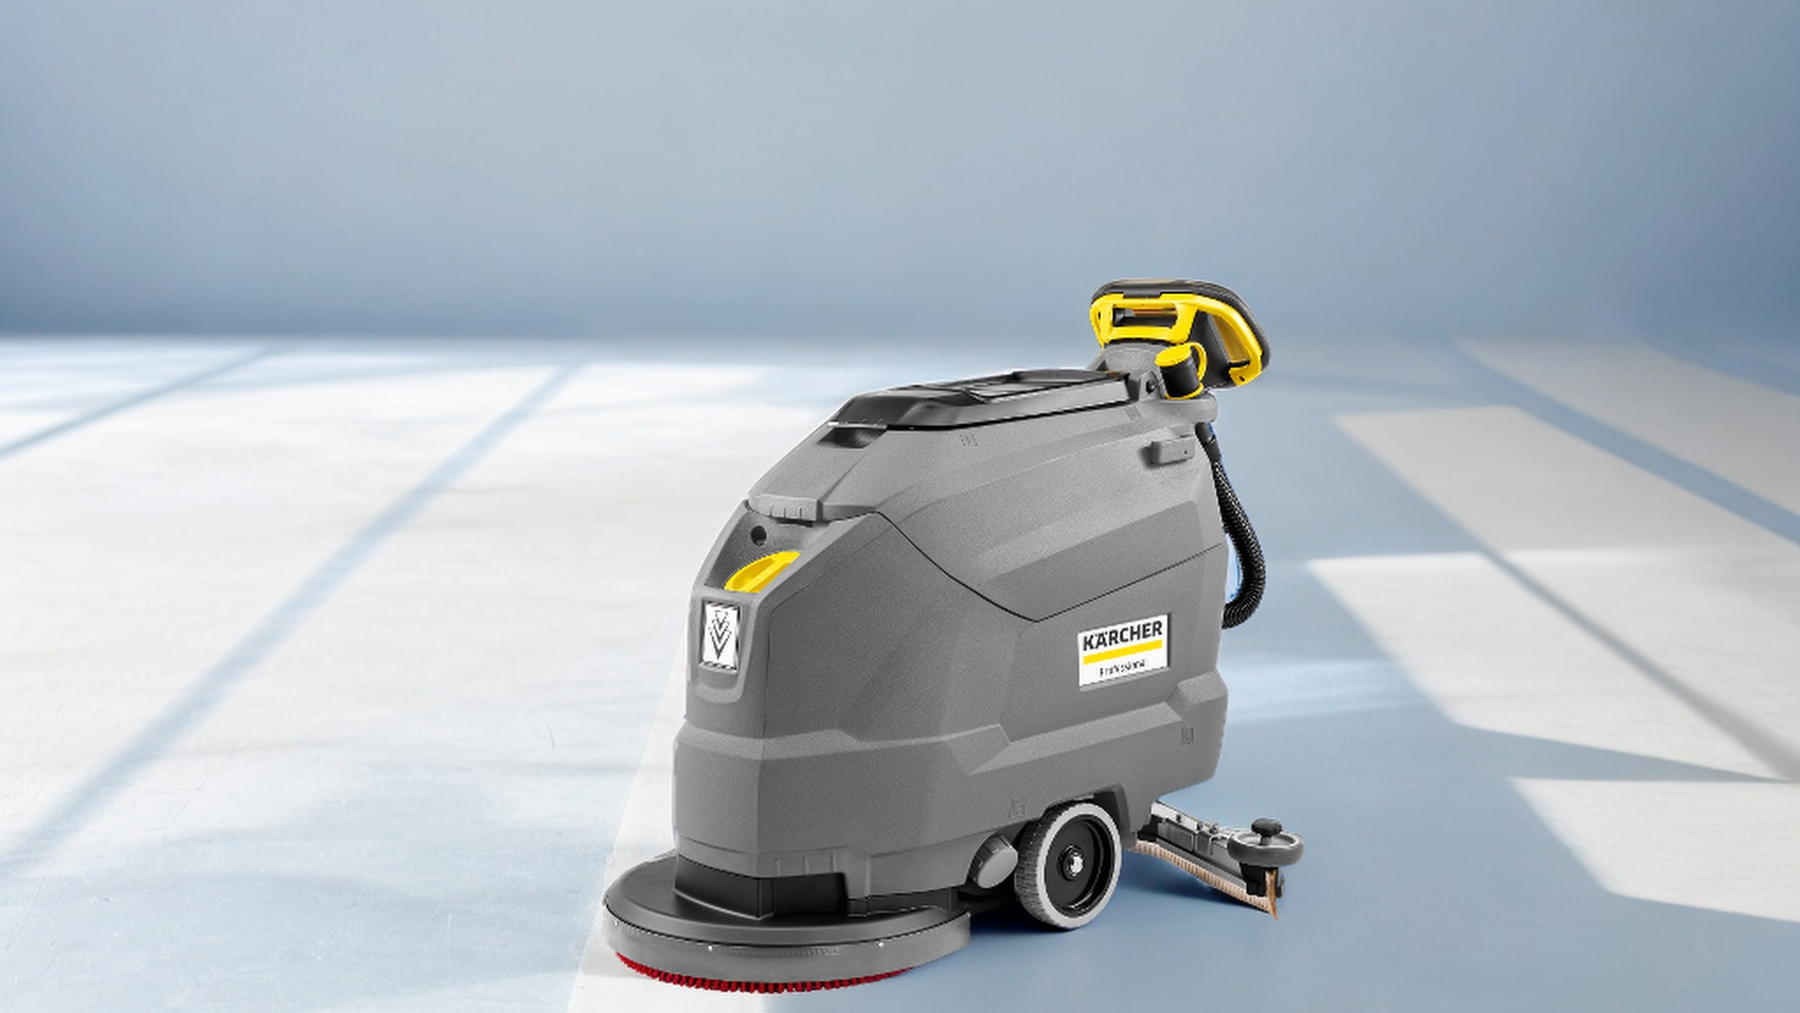 Karcher ride on scrubber and walk behind